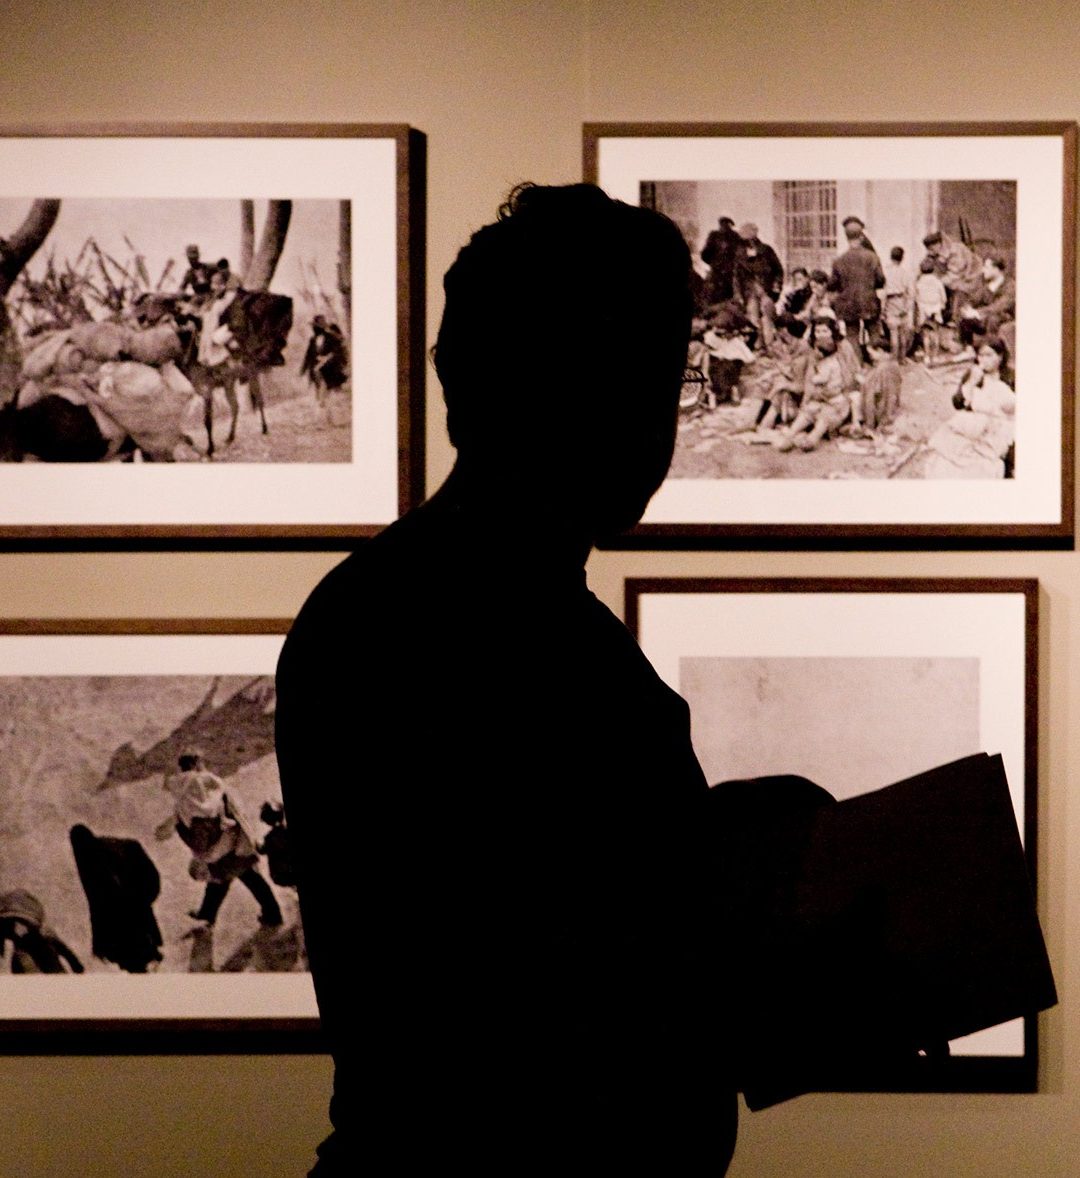 The silhouette of a person walking though a gallery exhibiting black and white photography and taking notes